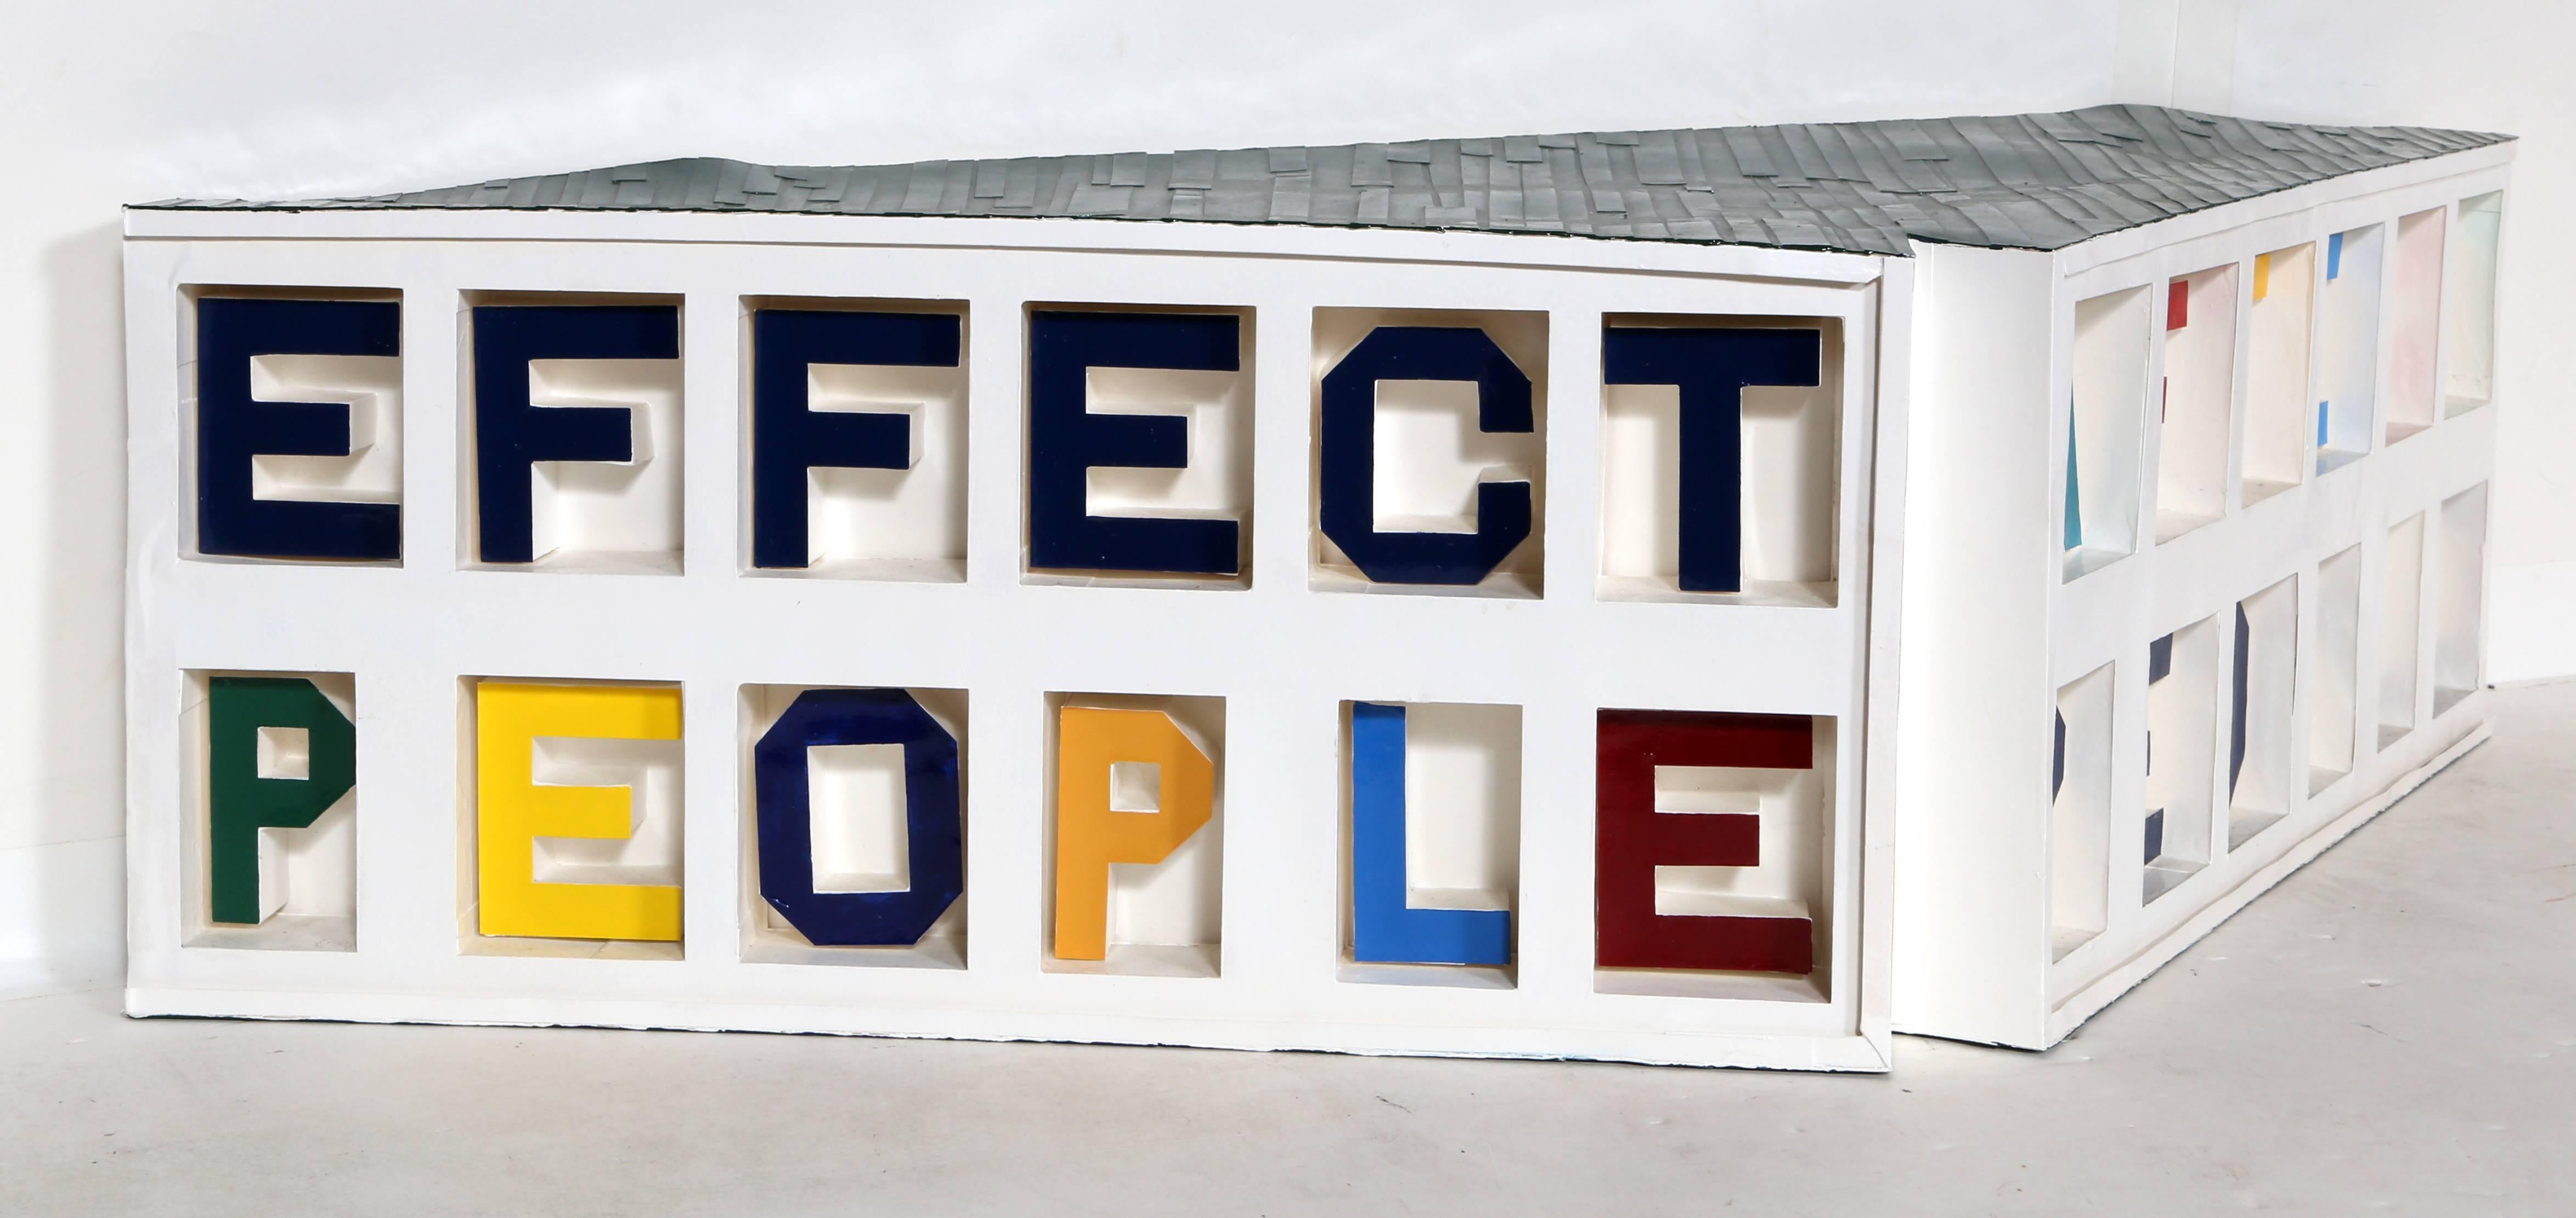 Effect People - Affect People, Text Art Mixed Media Sculpture by Chris Caccamise For Sale 2